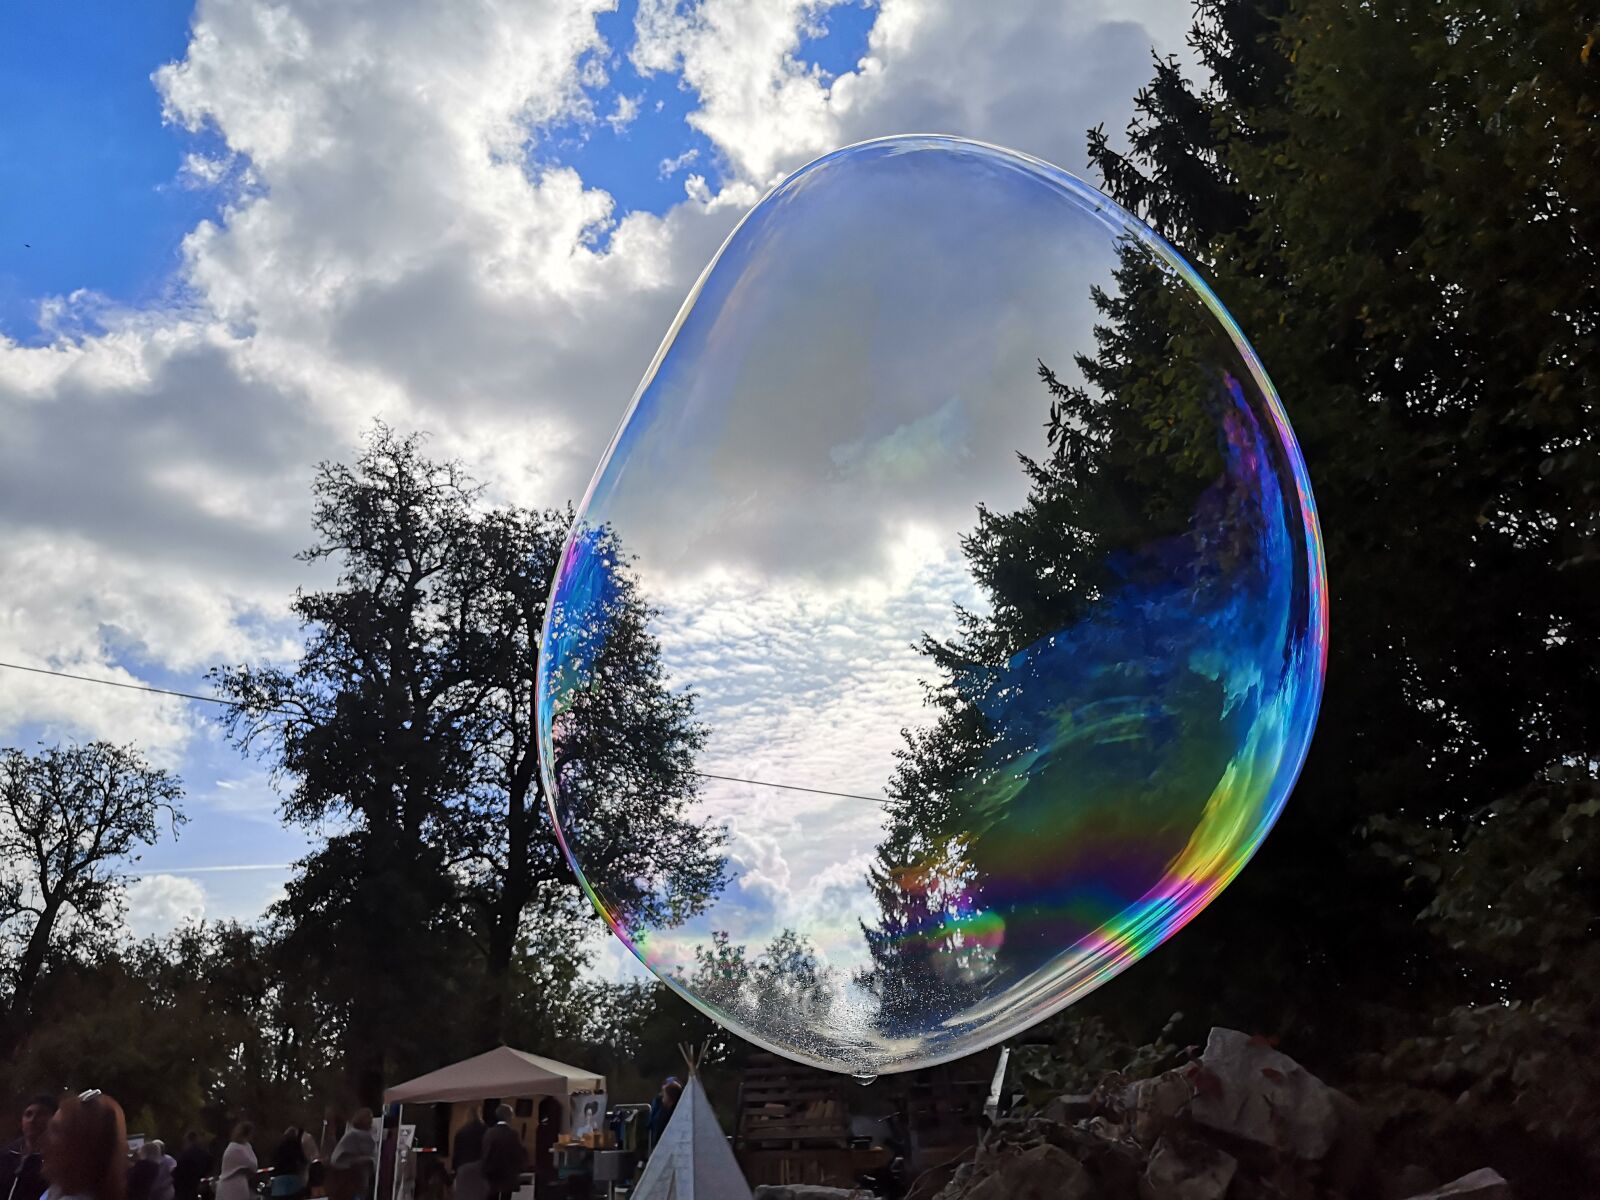 HUAWEI P20 sample photo. Soap bubble, clouds, sky photography